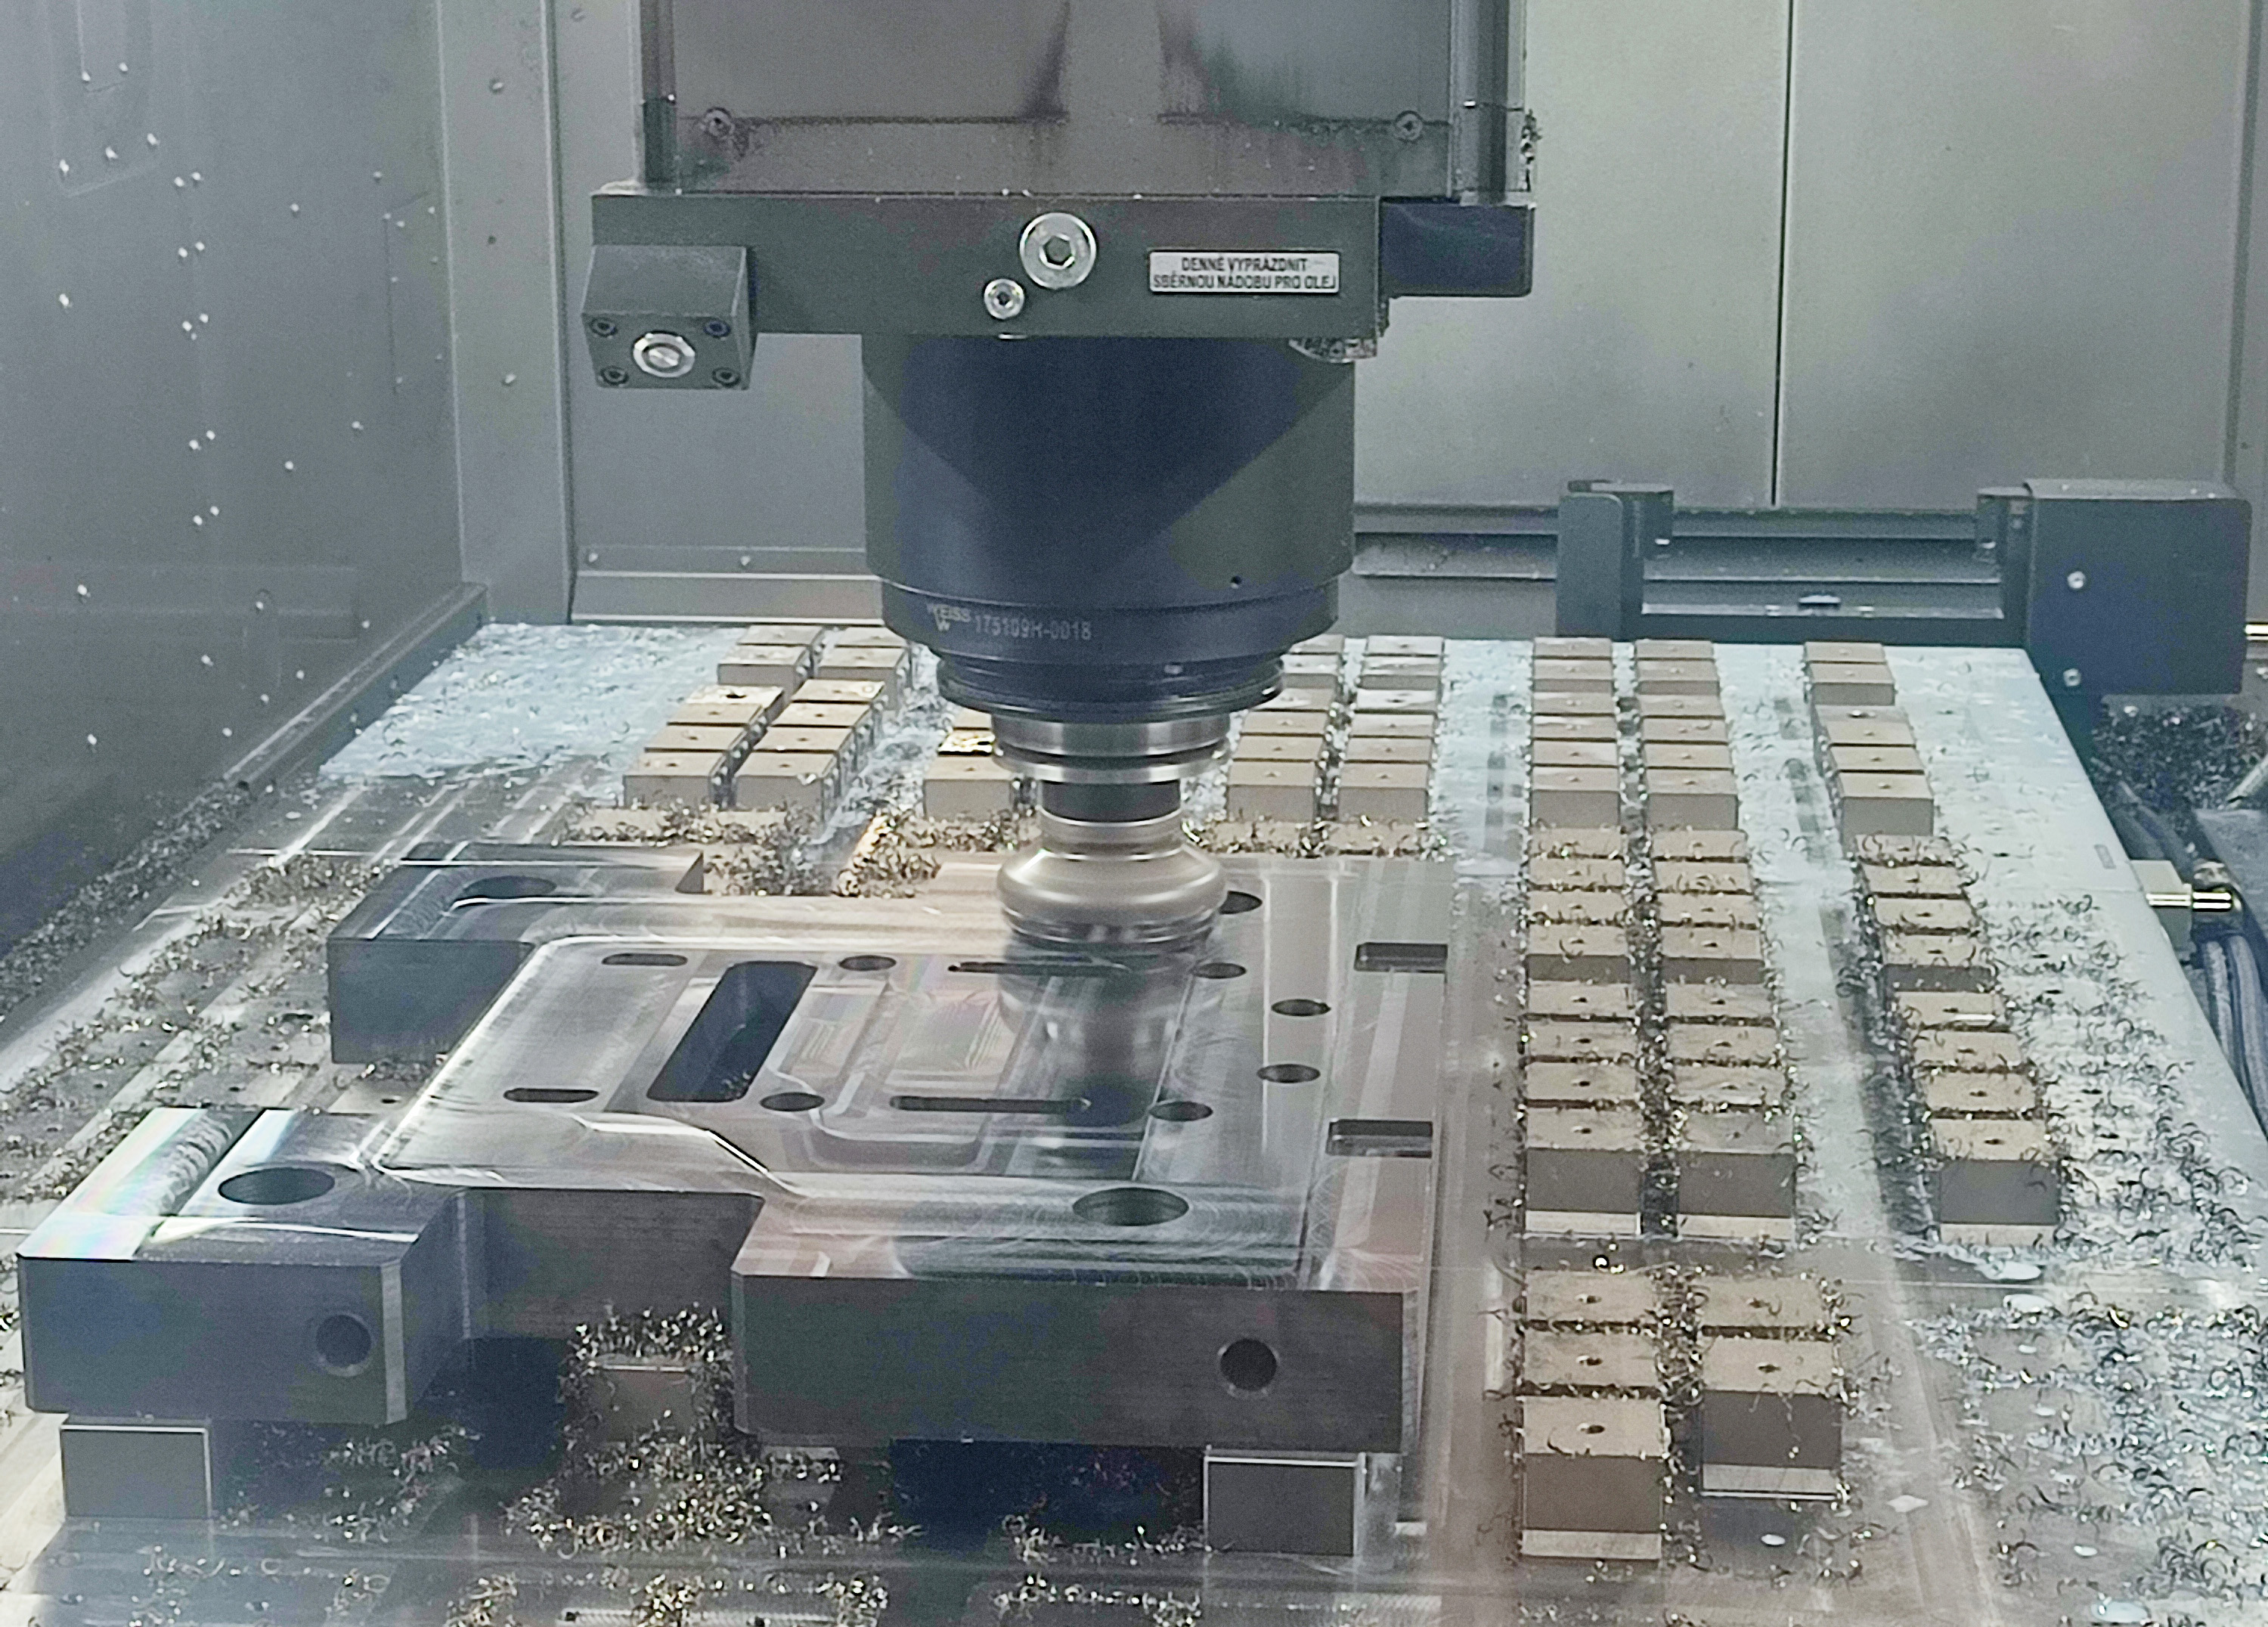 Pros and cons of milling operations on a magnet